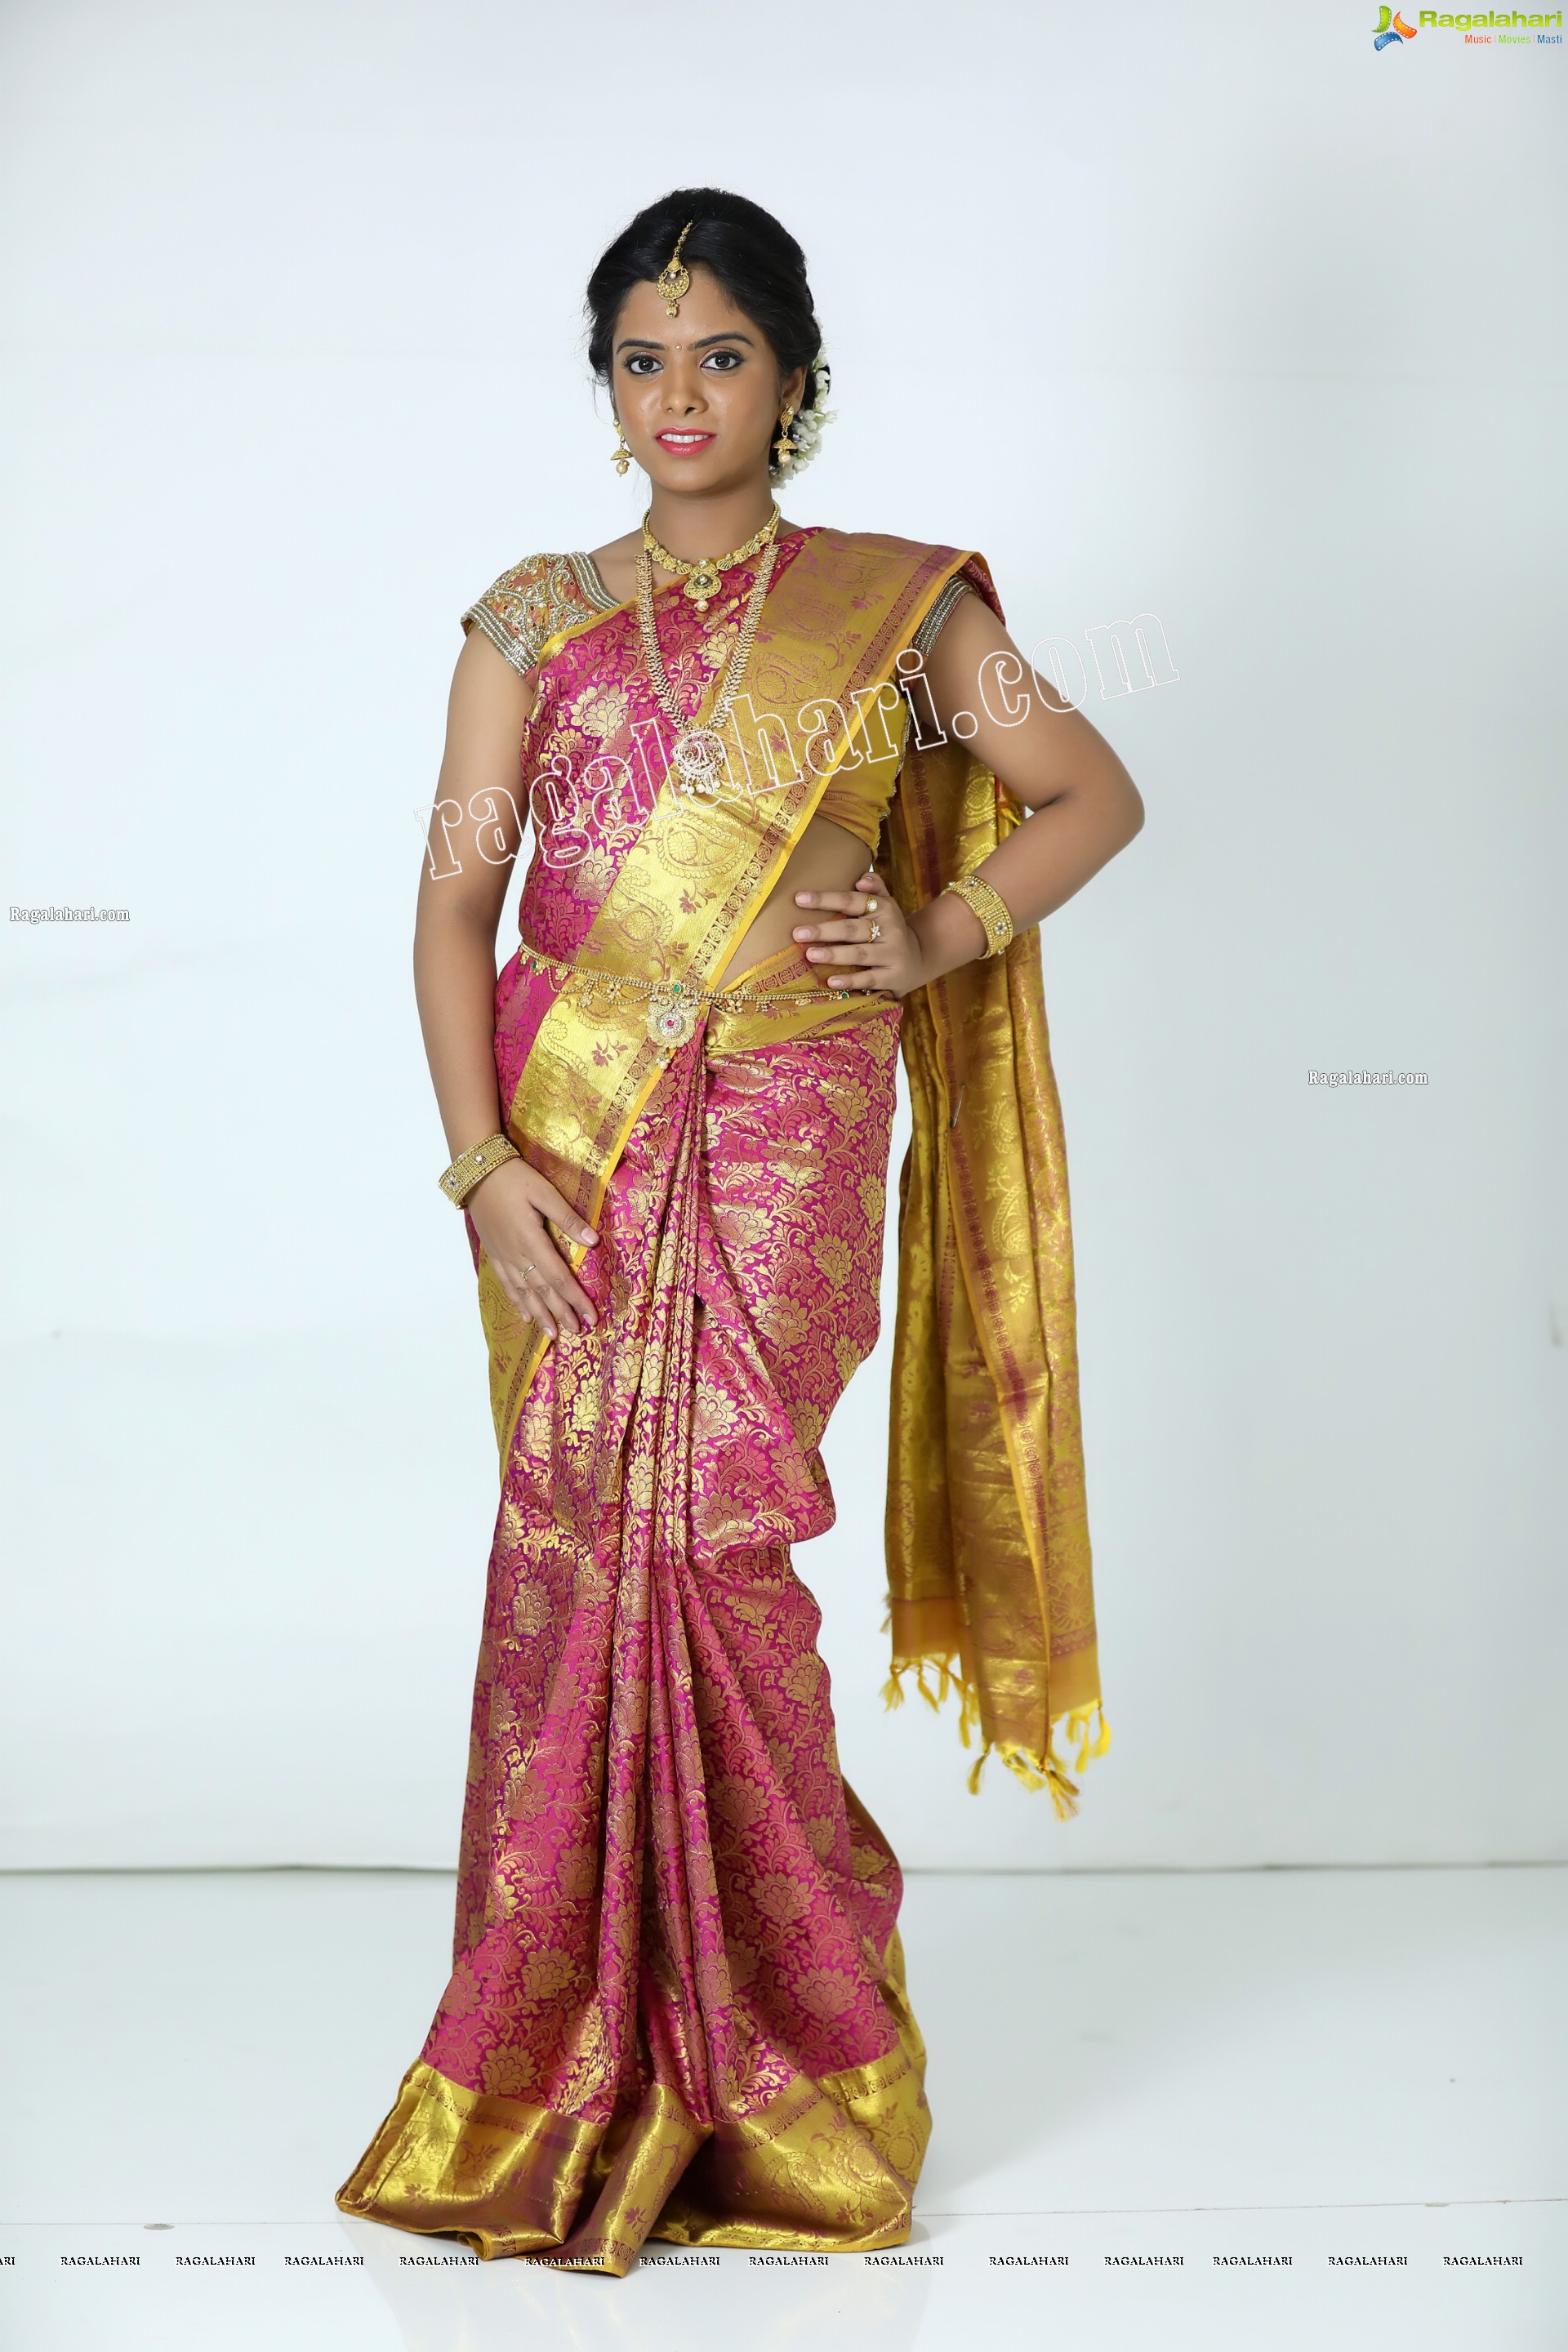 Sameera Reddy G in Pink and Gold Silk Saree With Jewellery Exclusive Photo Shoot